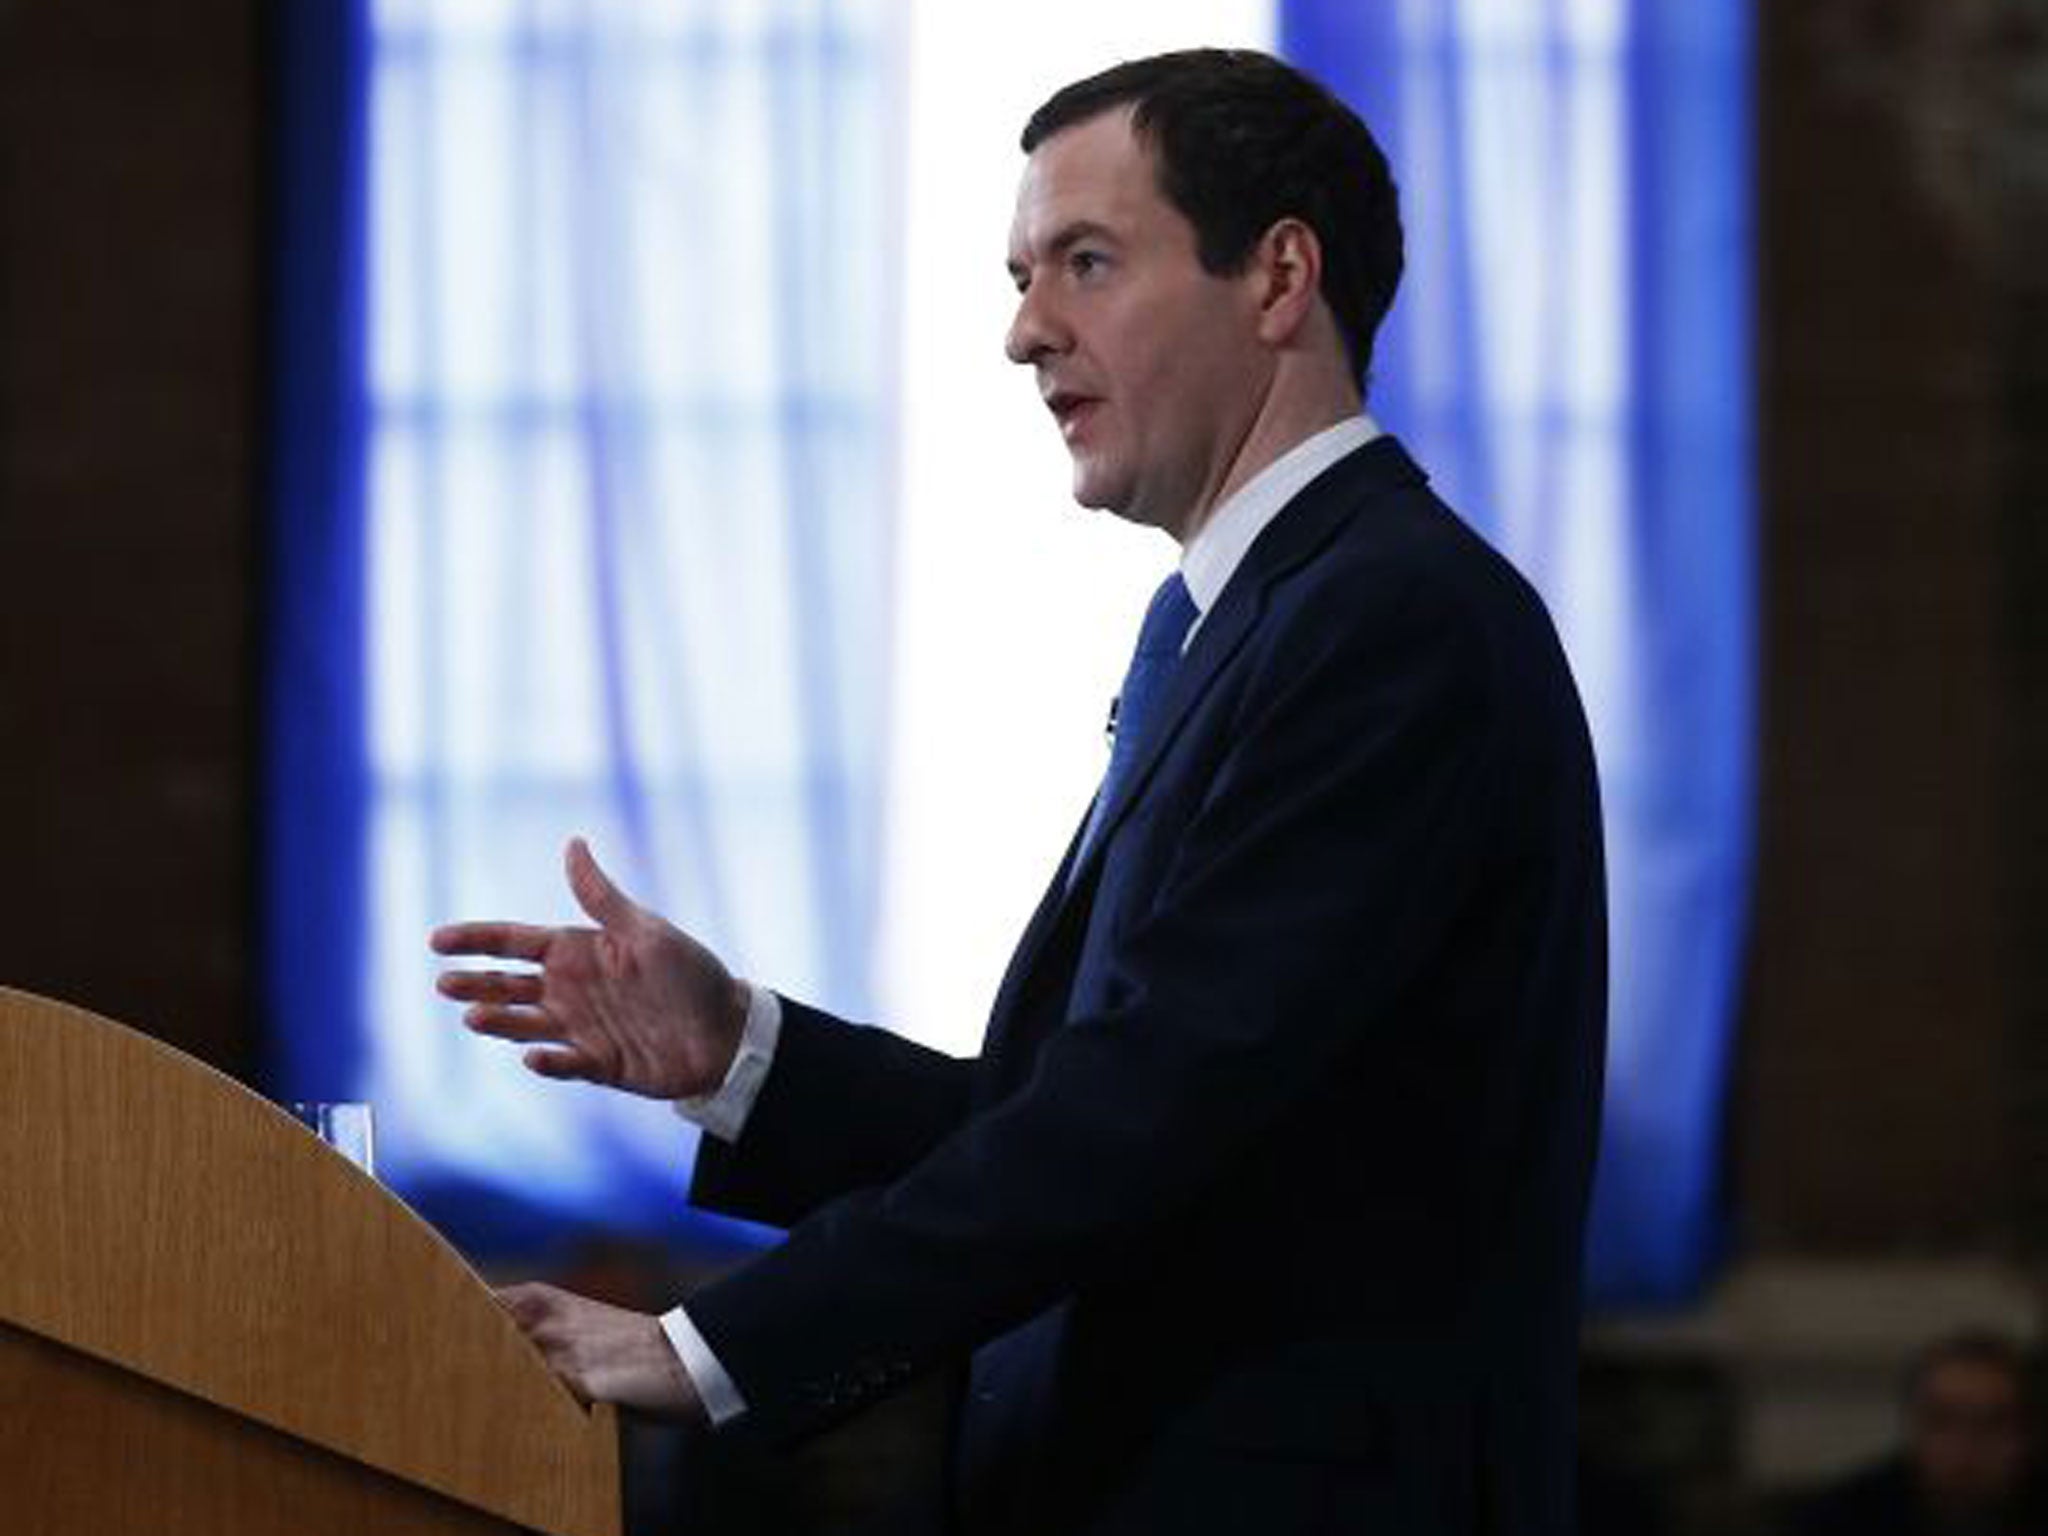 George Osborne told workers at Tilbury Docks he wanted to create jobs